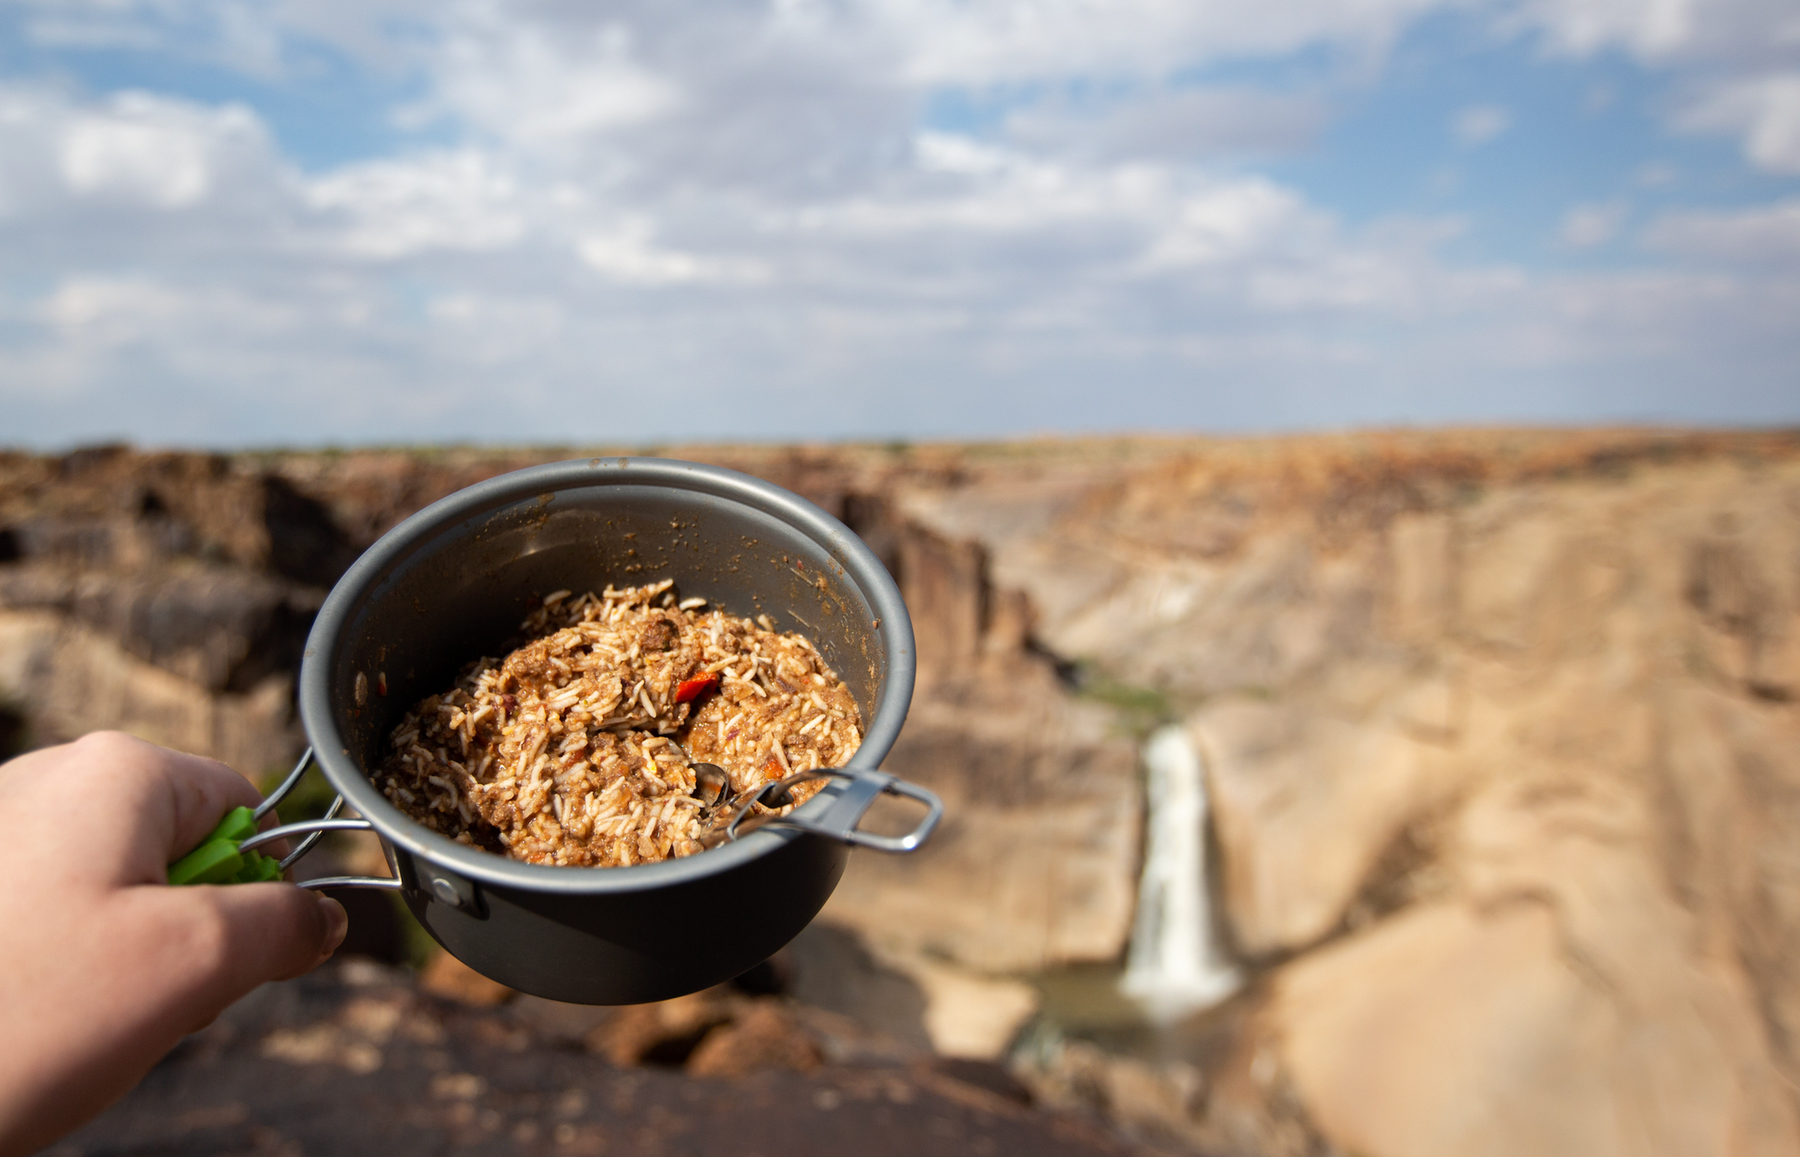 Top 5 Freeze Dried Meals for Your Next Adventure